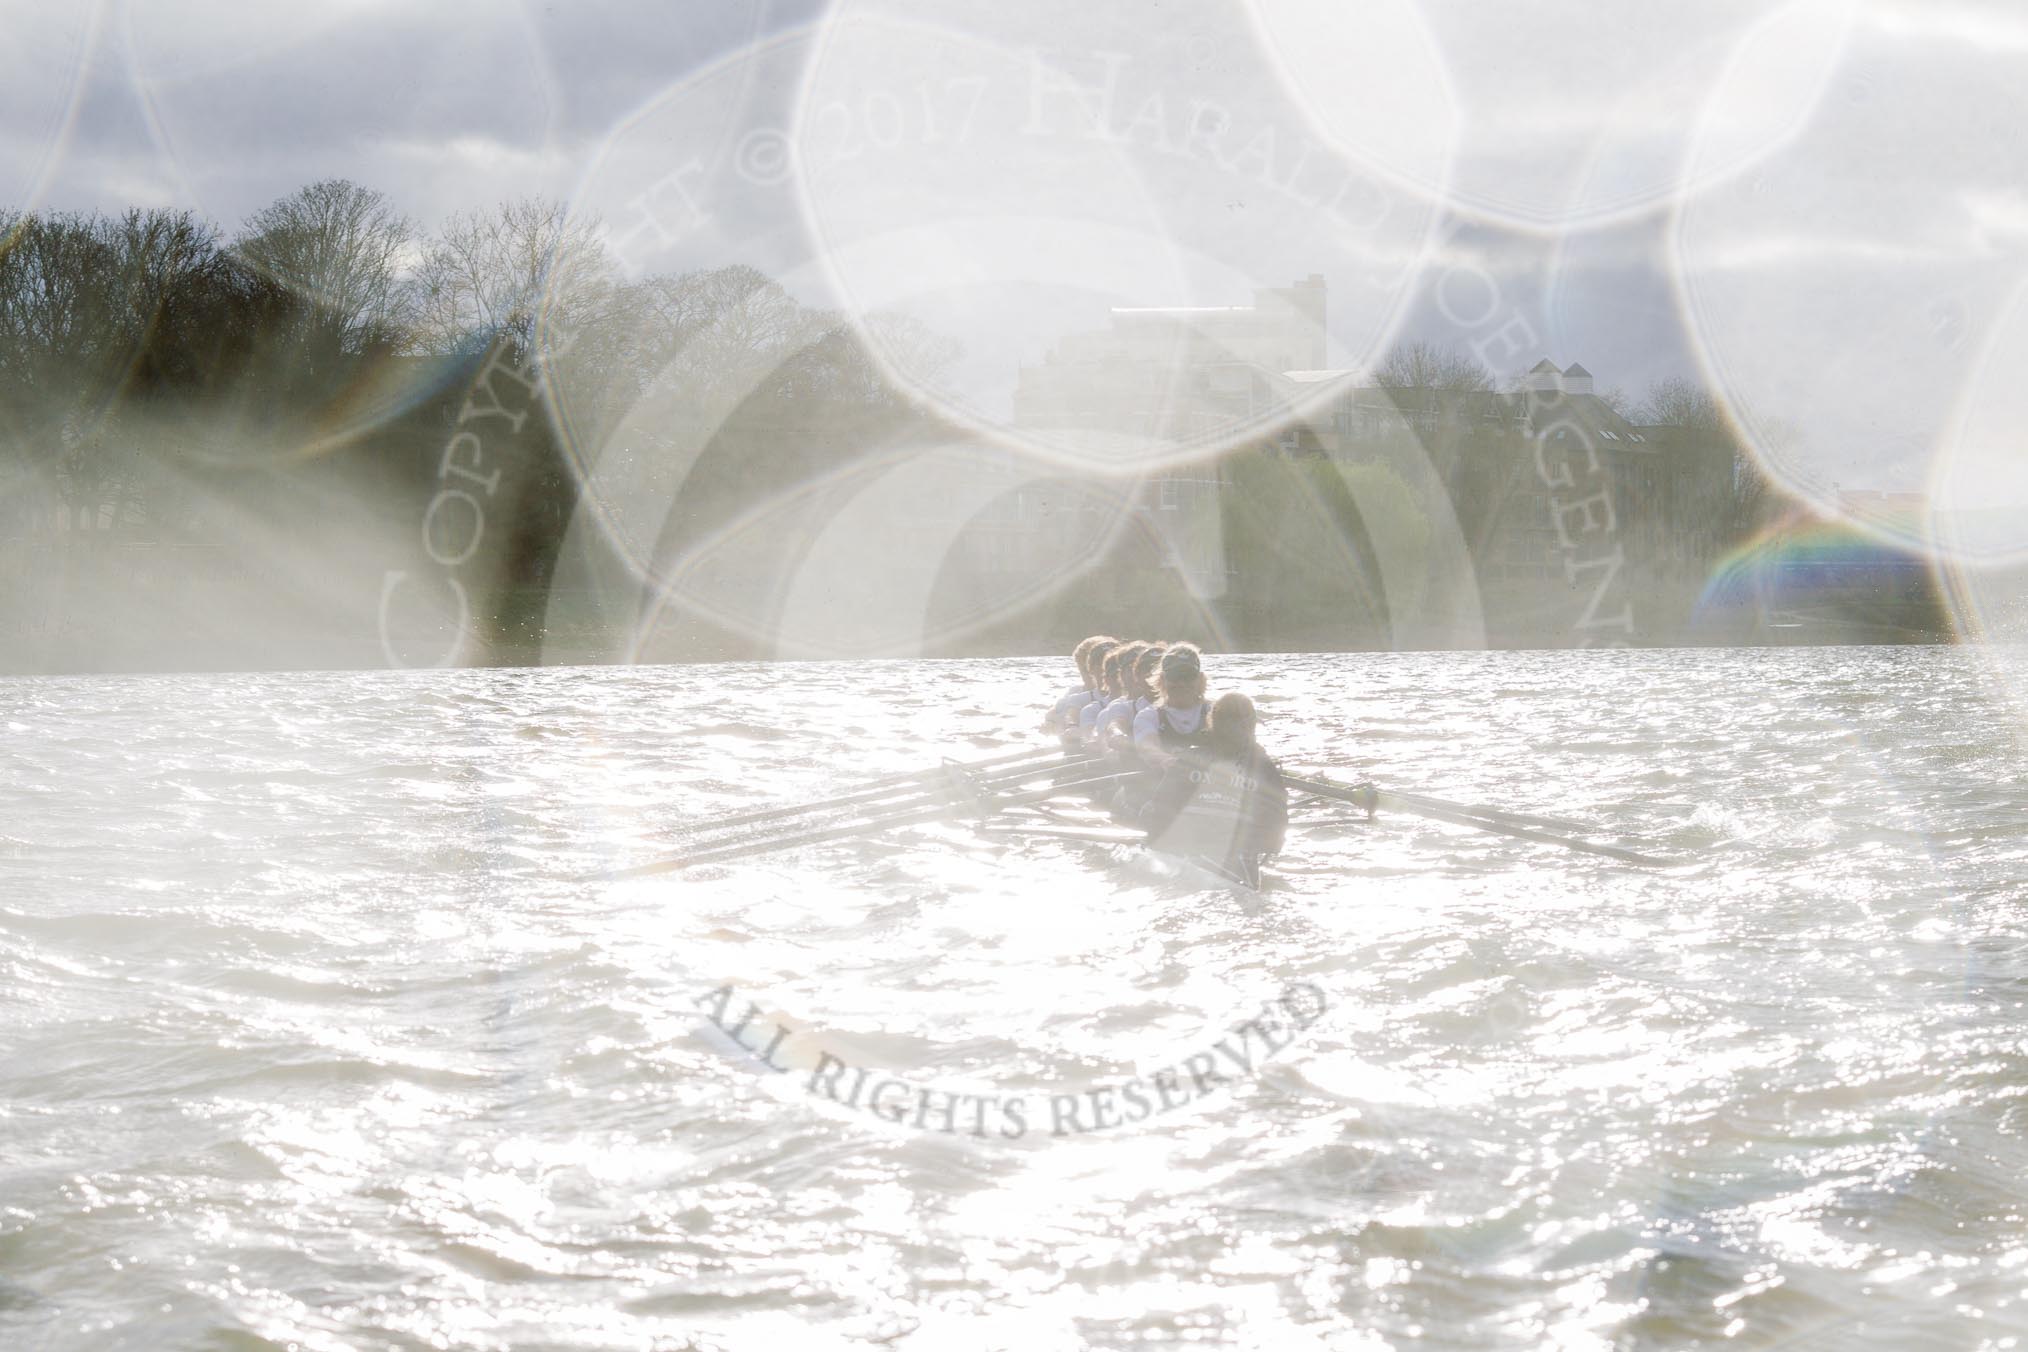 The Cancer Research UK Boat Race season 2017 - Women's Boat Race Fixture OUWBC vs Molesey BC: OUWBC hardly visible against the low sun, and spray on the lens.
River Thames between Putney Bridge and Mortlake,
London SW15,

United Kingdom,
on 19 March 2017 at 16:23, image #146